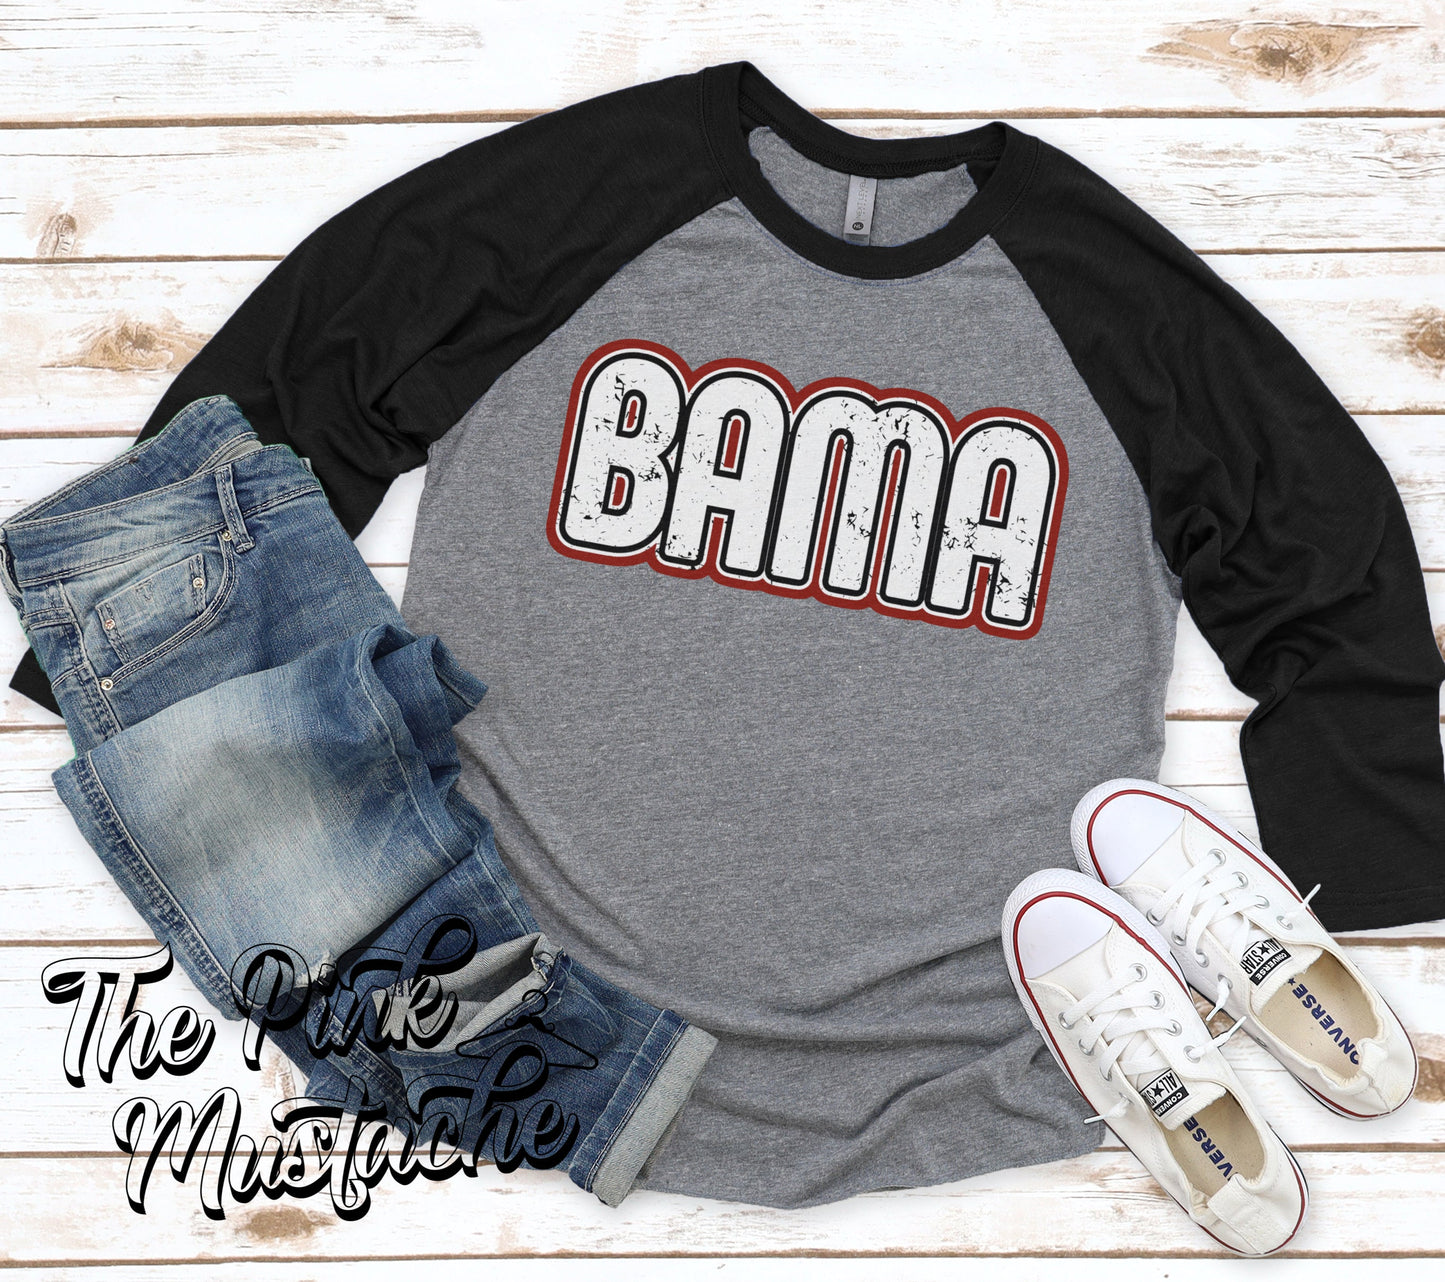 Toddler, Youth, and Adult Sized Bama Raglan